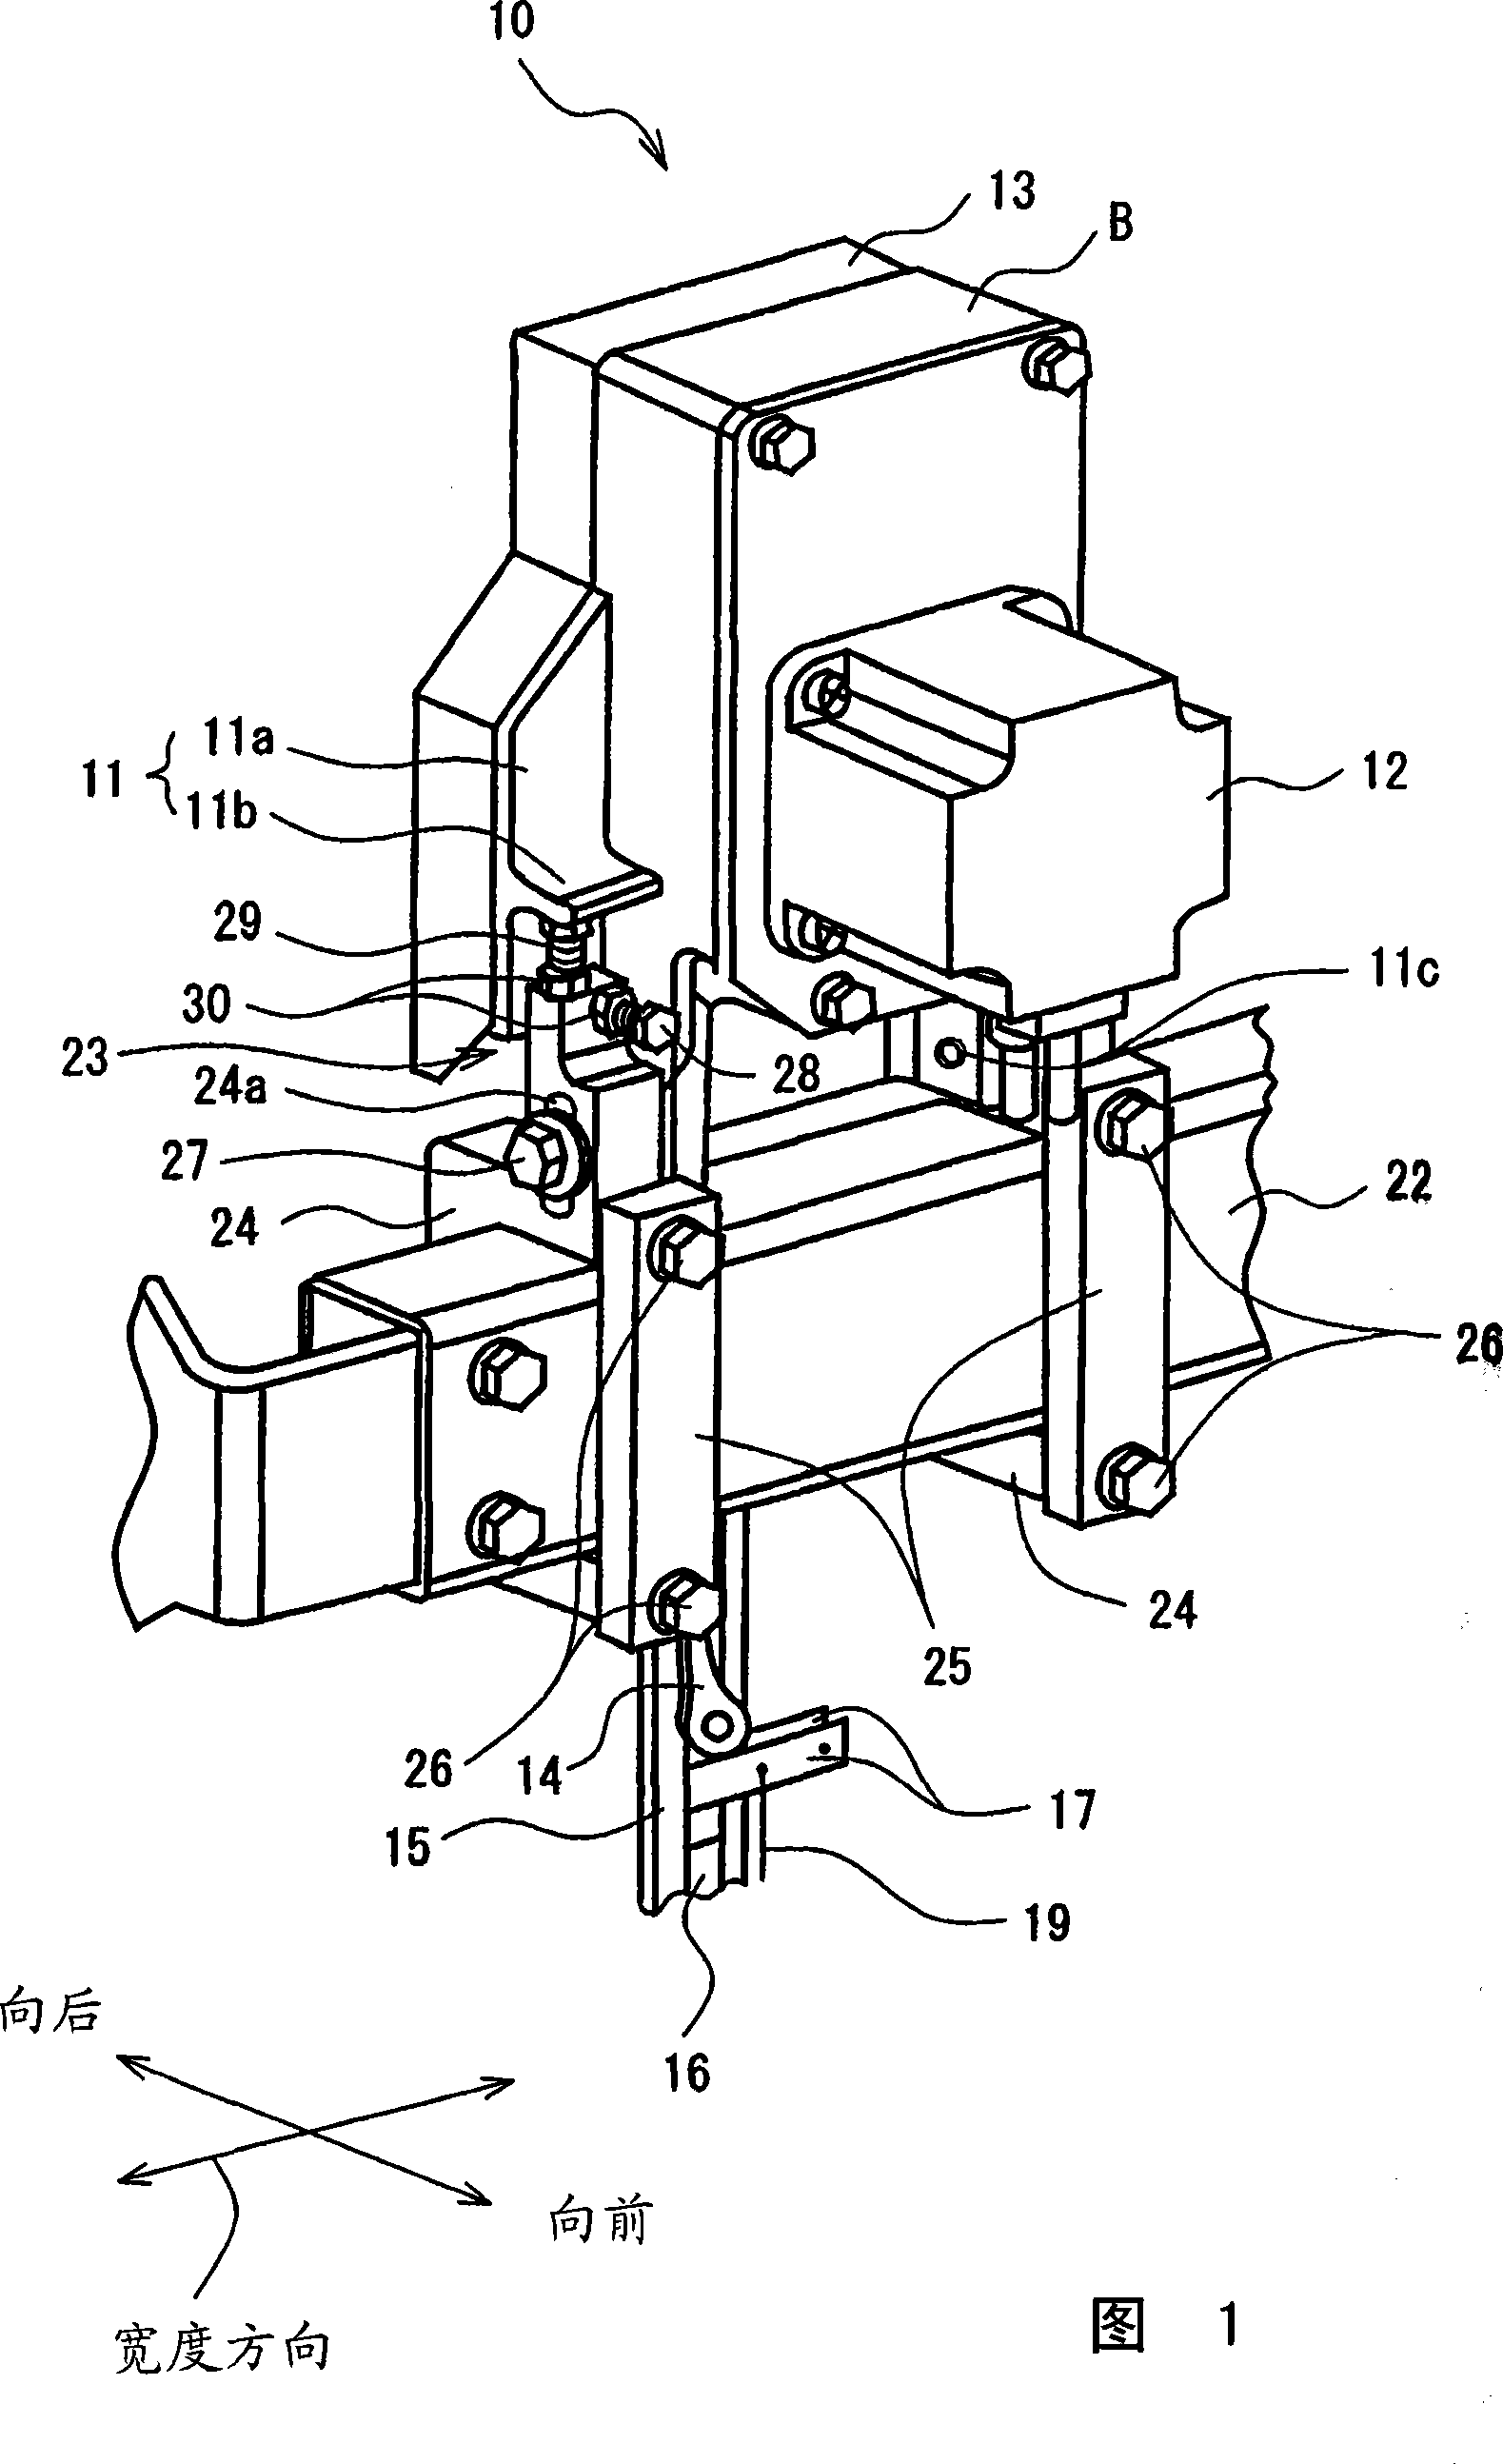 Thrum yarn shuttle mouth forming device in loom